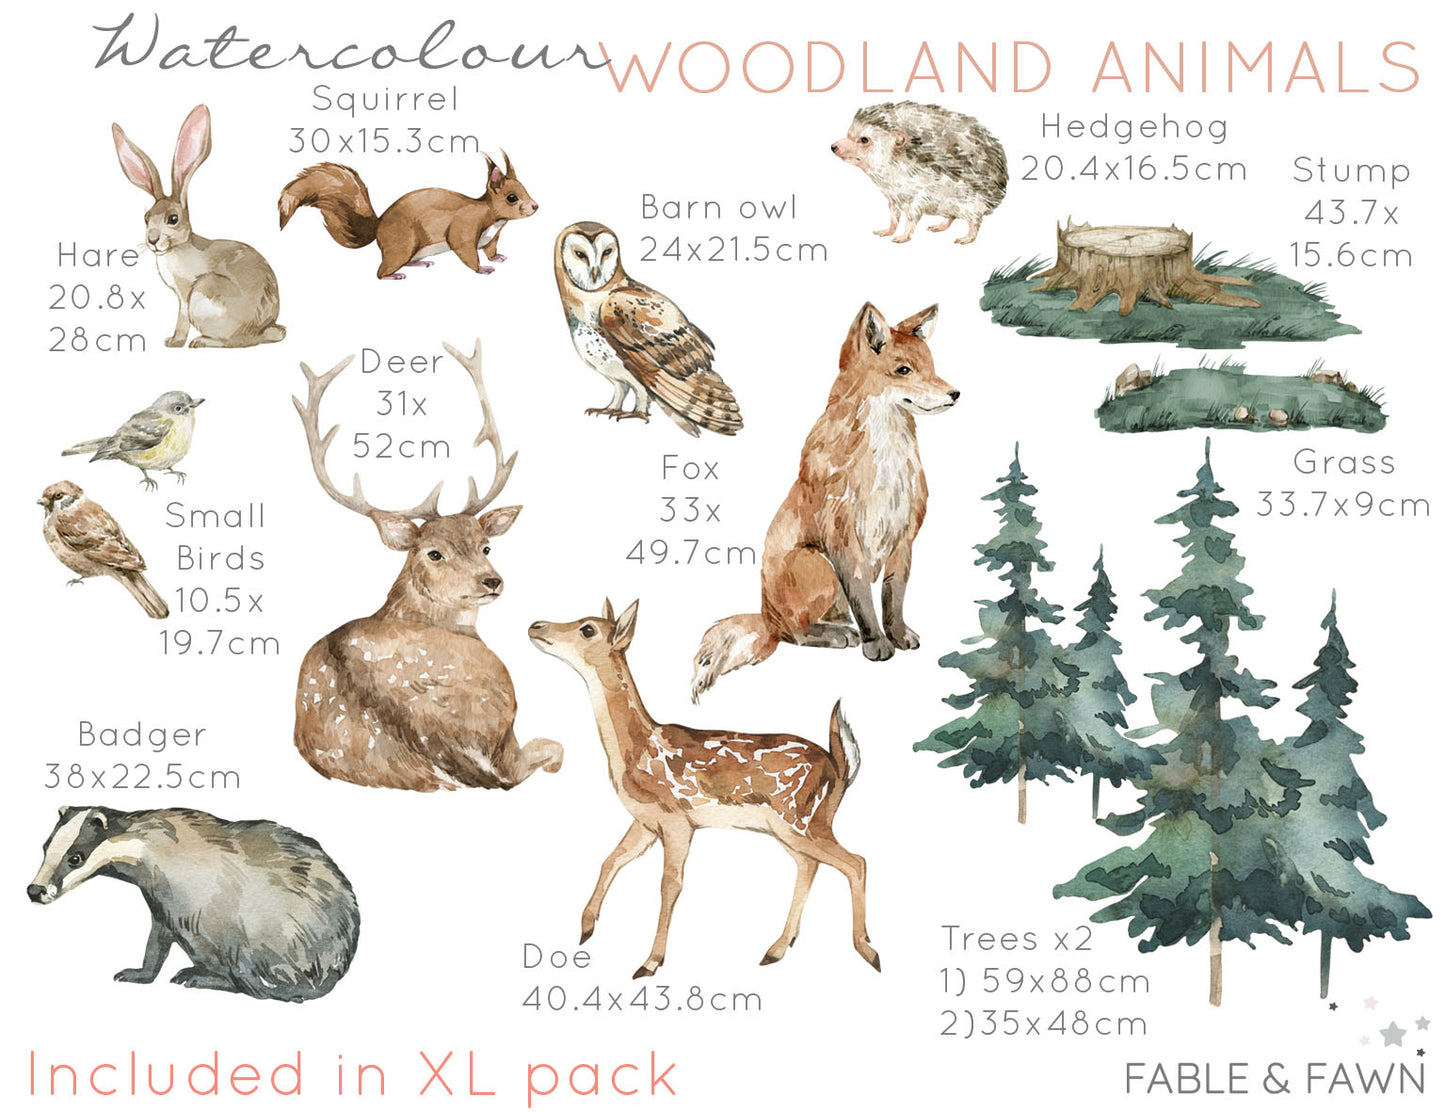 Forest Animal Wall Decals - Wall Decals Australia - Fable and Fawn 